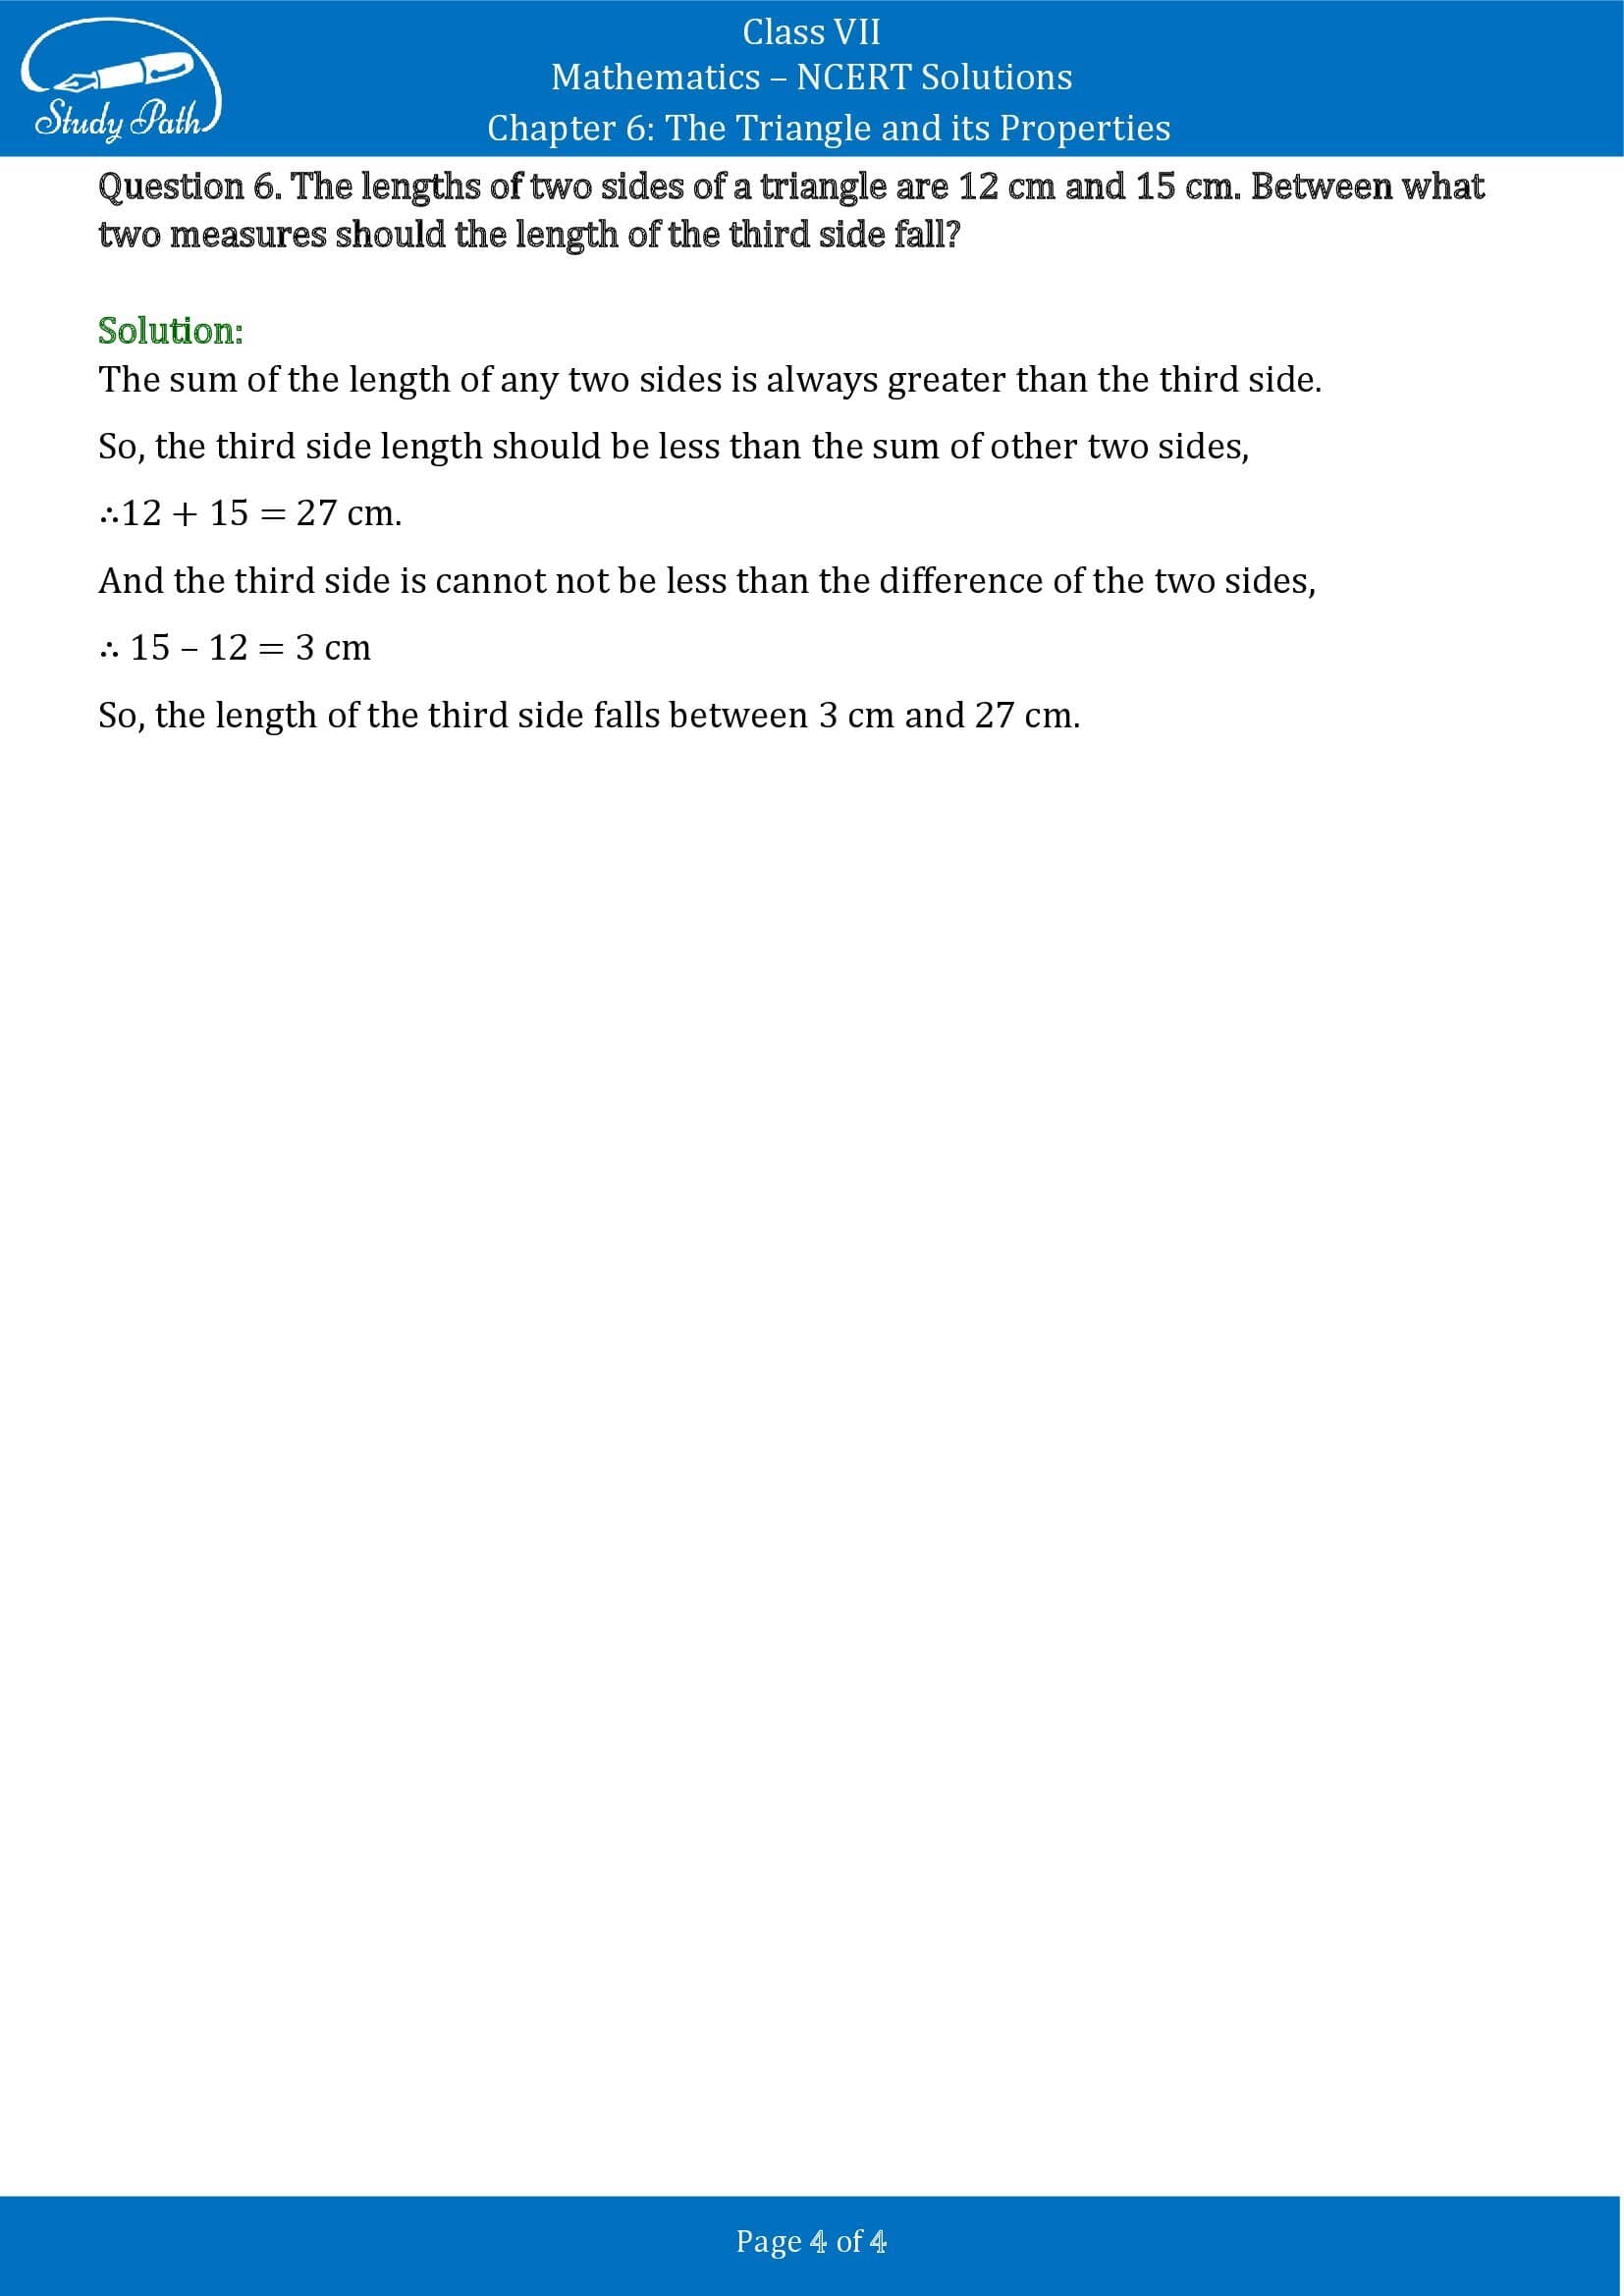 NCERT Solutions for Class 7 Maths Chapter 6 The Triangle and its Properties Exercise 6.4 00004